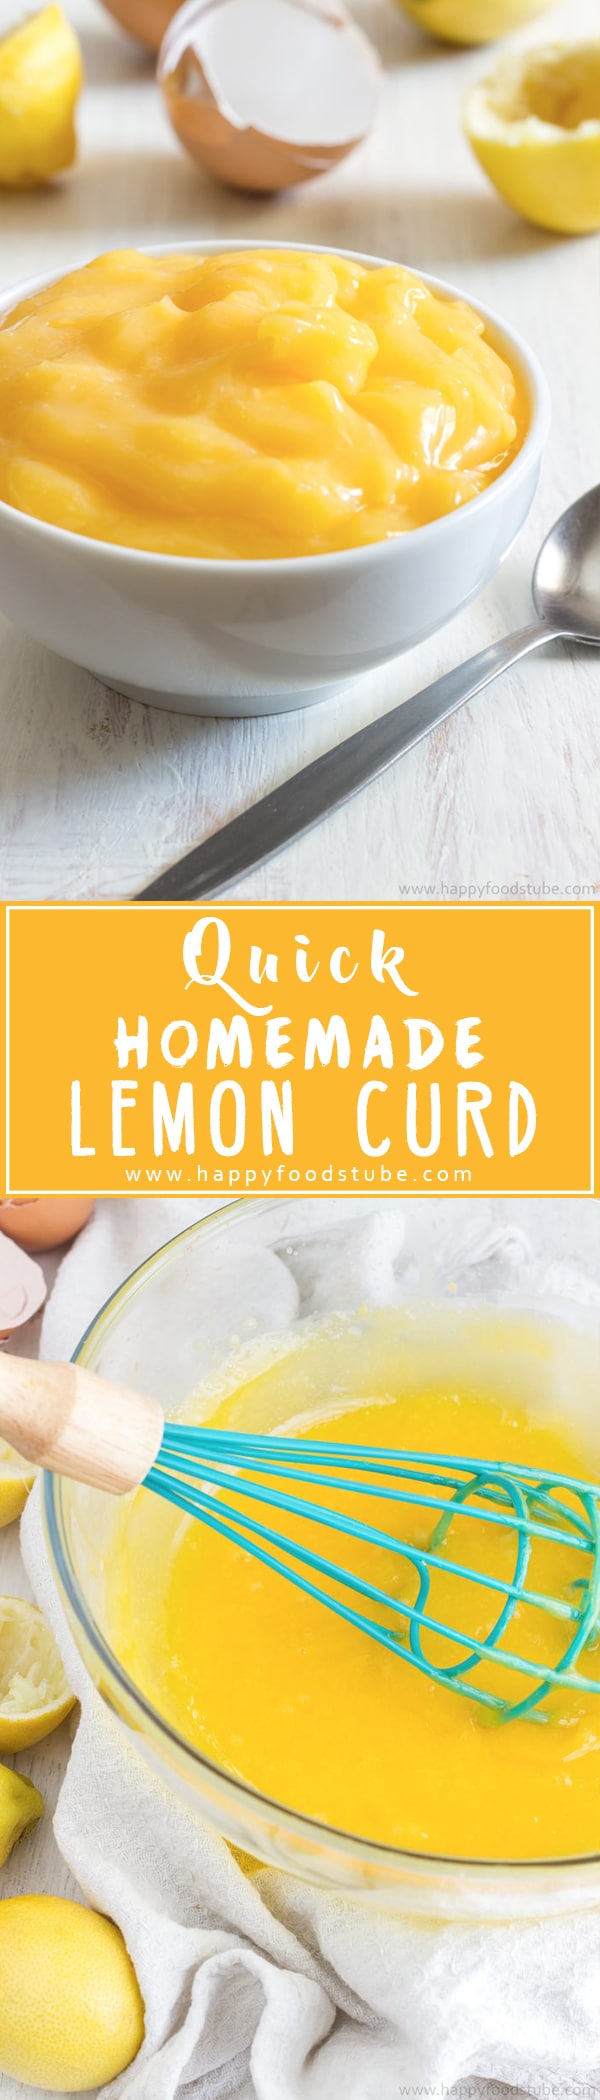 How to make Homemade Lemon Curd. Its great in desserts! Follow this easy & fast recipe to get creamy, sweet & sour perfection! Only 4 ingredients and its ready in less than 15 minutes. | happyfoodstube.com